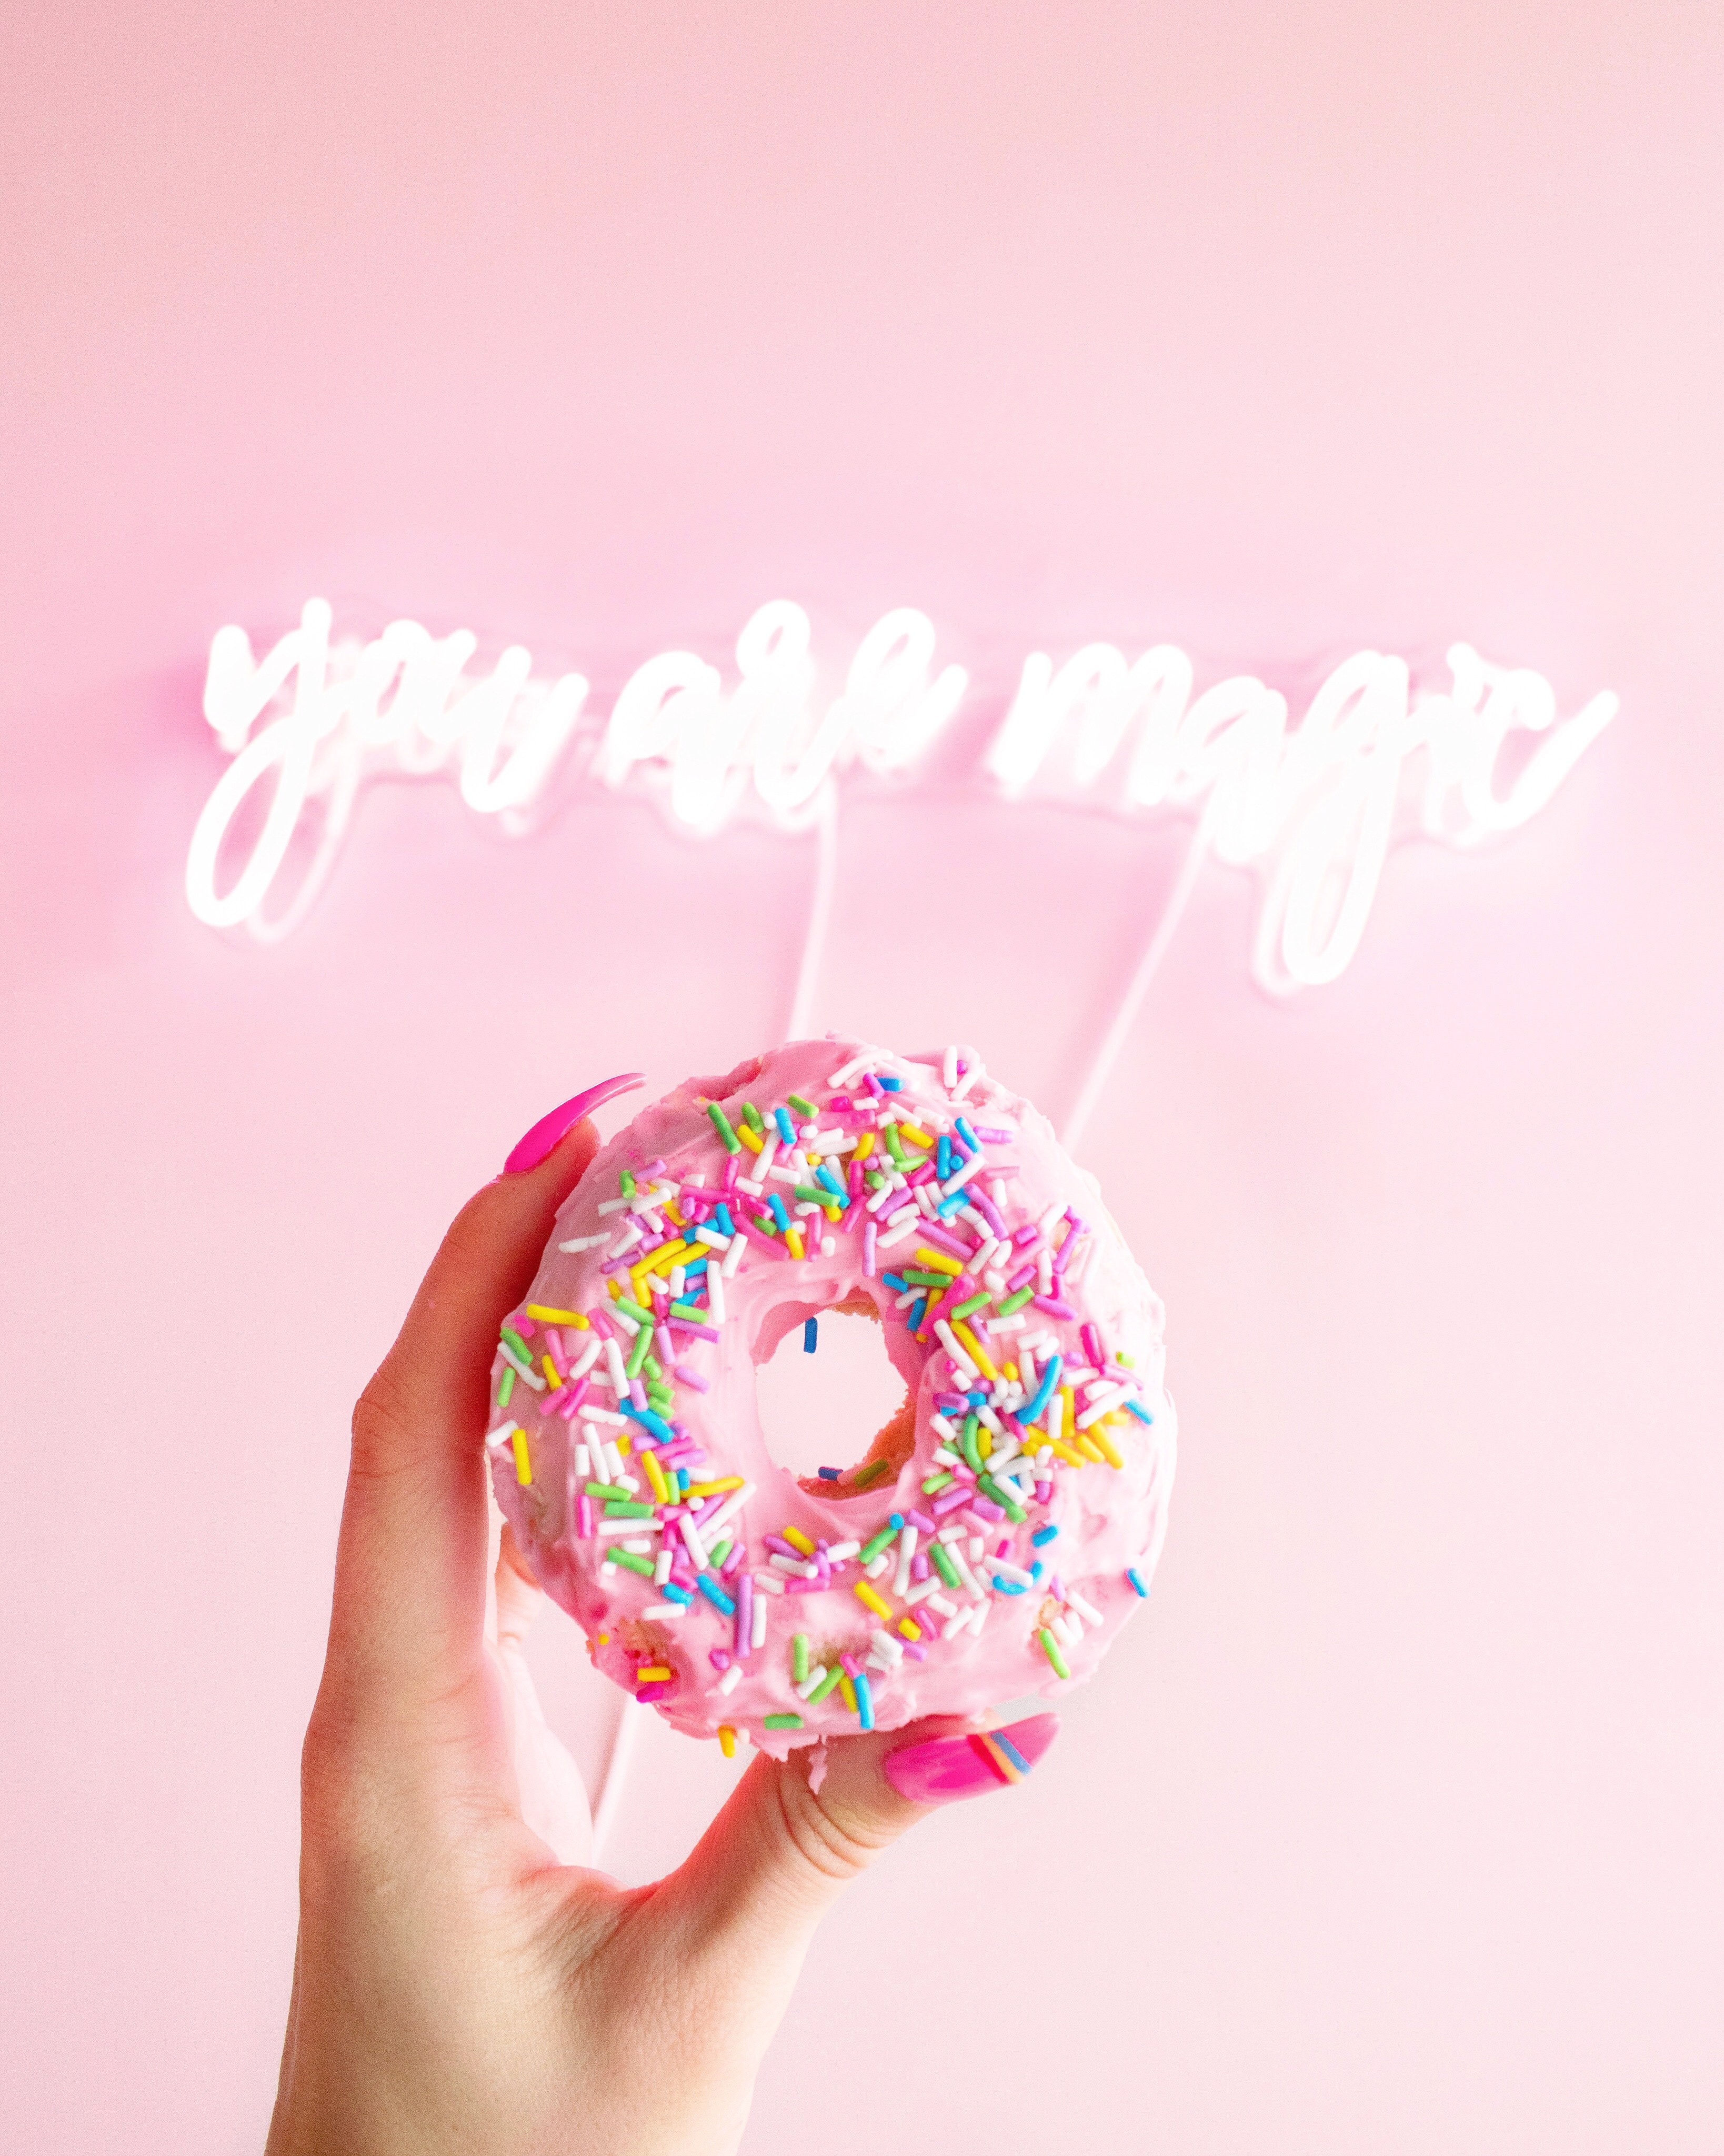 You are magic sign with a woman holding up a donut